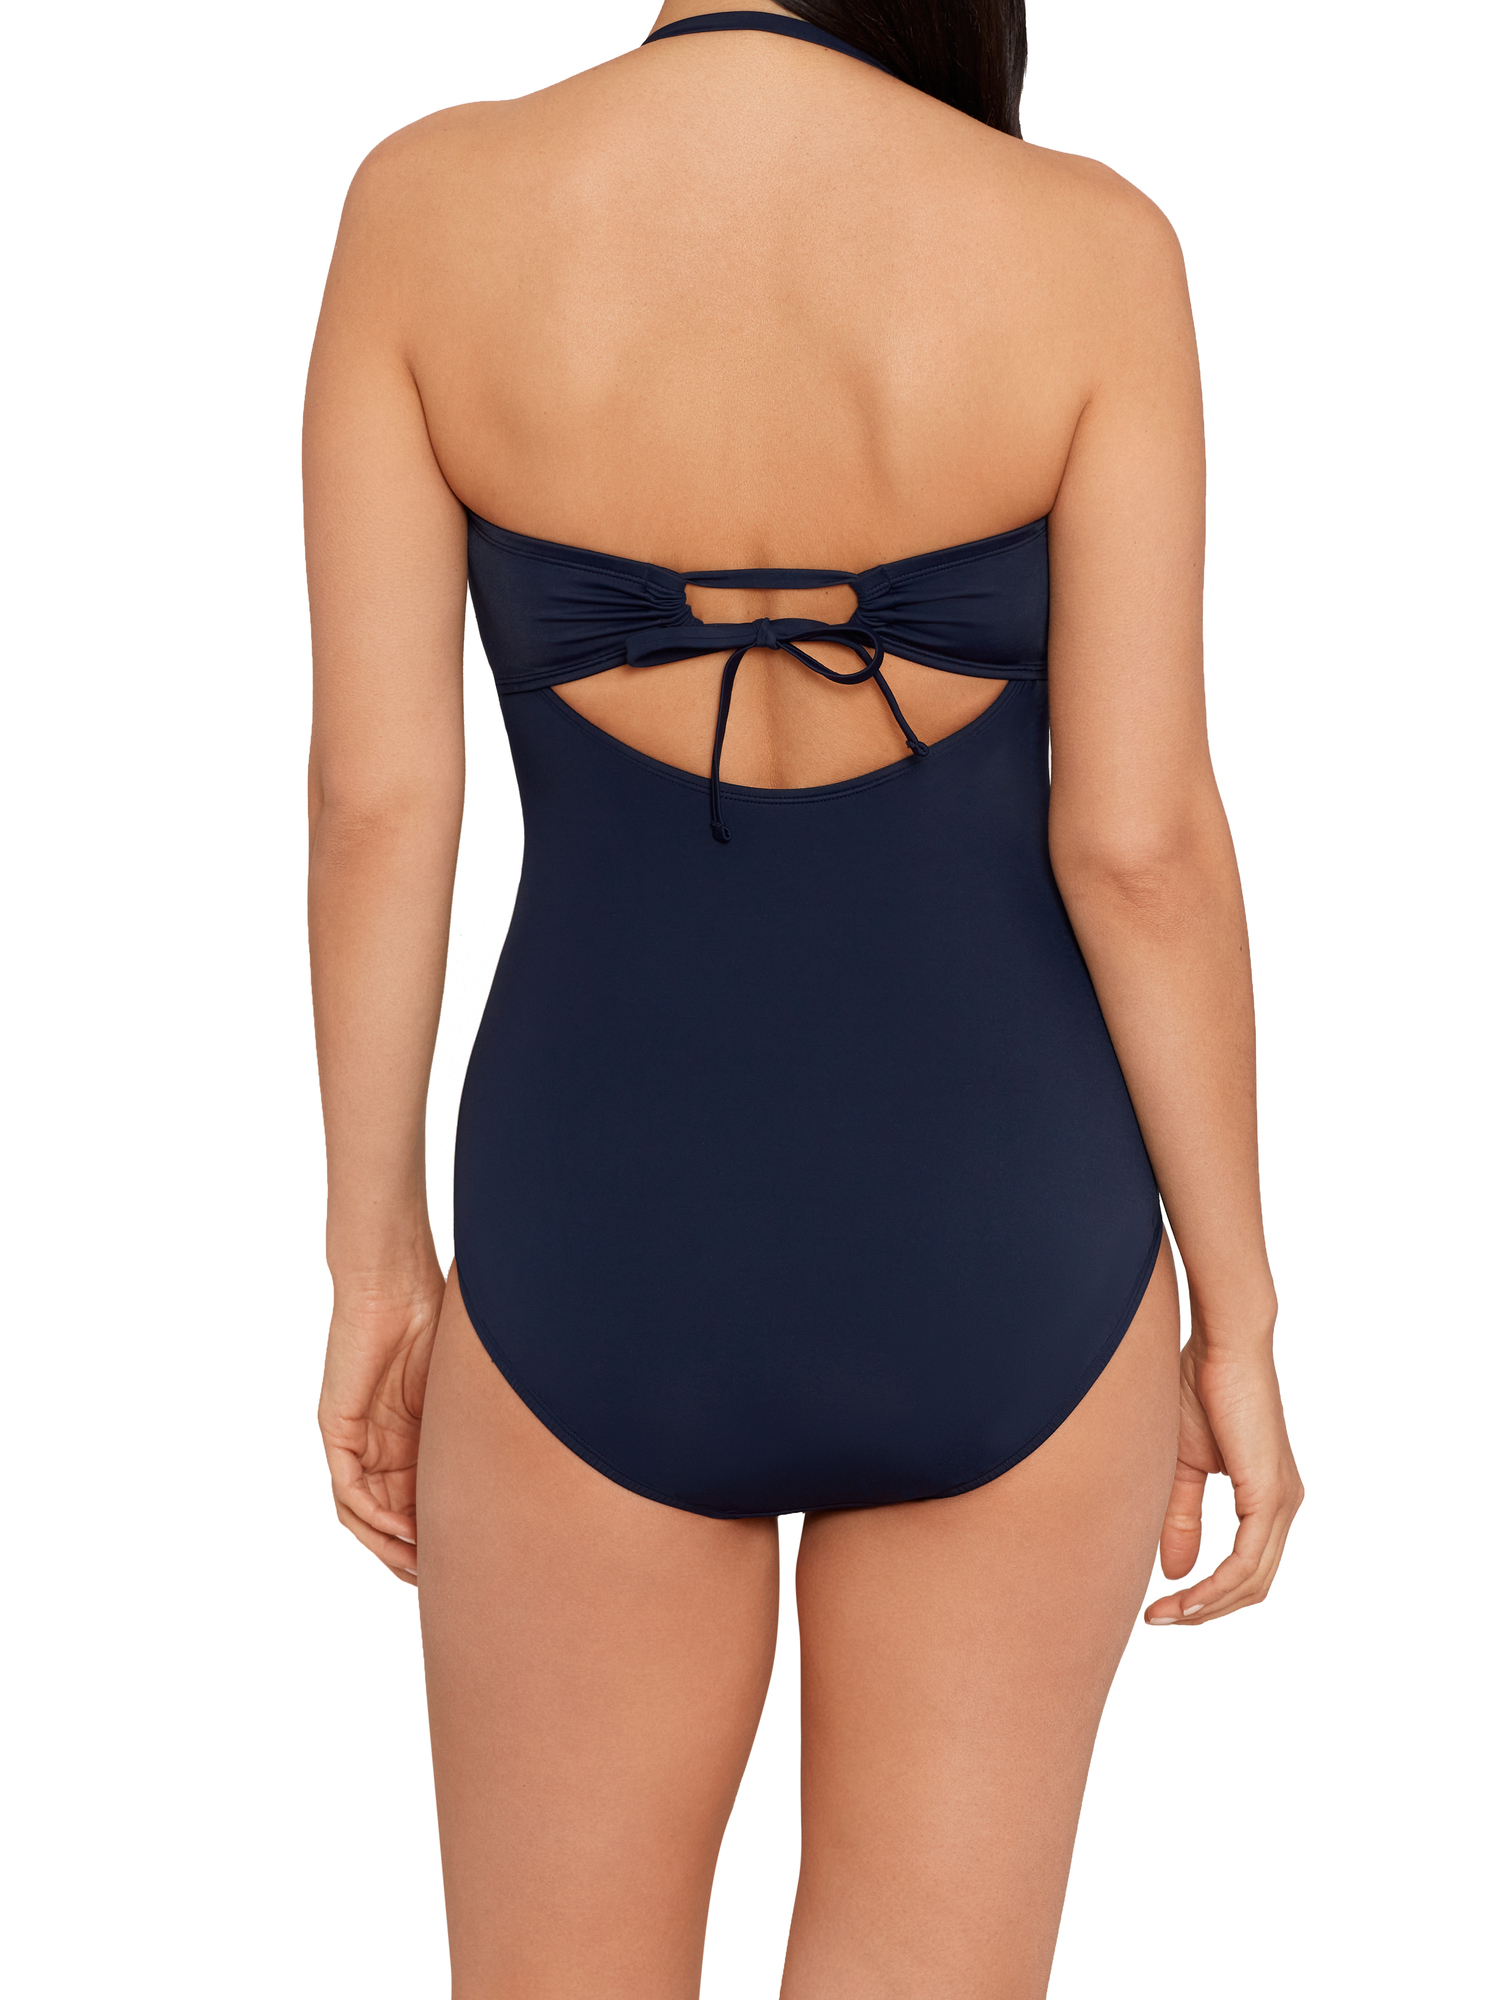 Time and Tru Women's Strapless One Piece Swimsuit - image 5 of 7